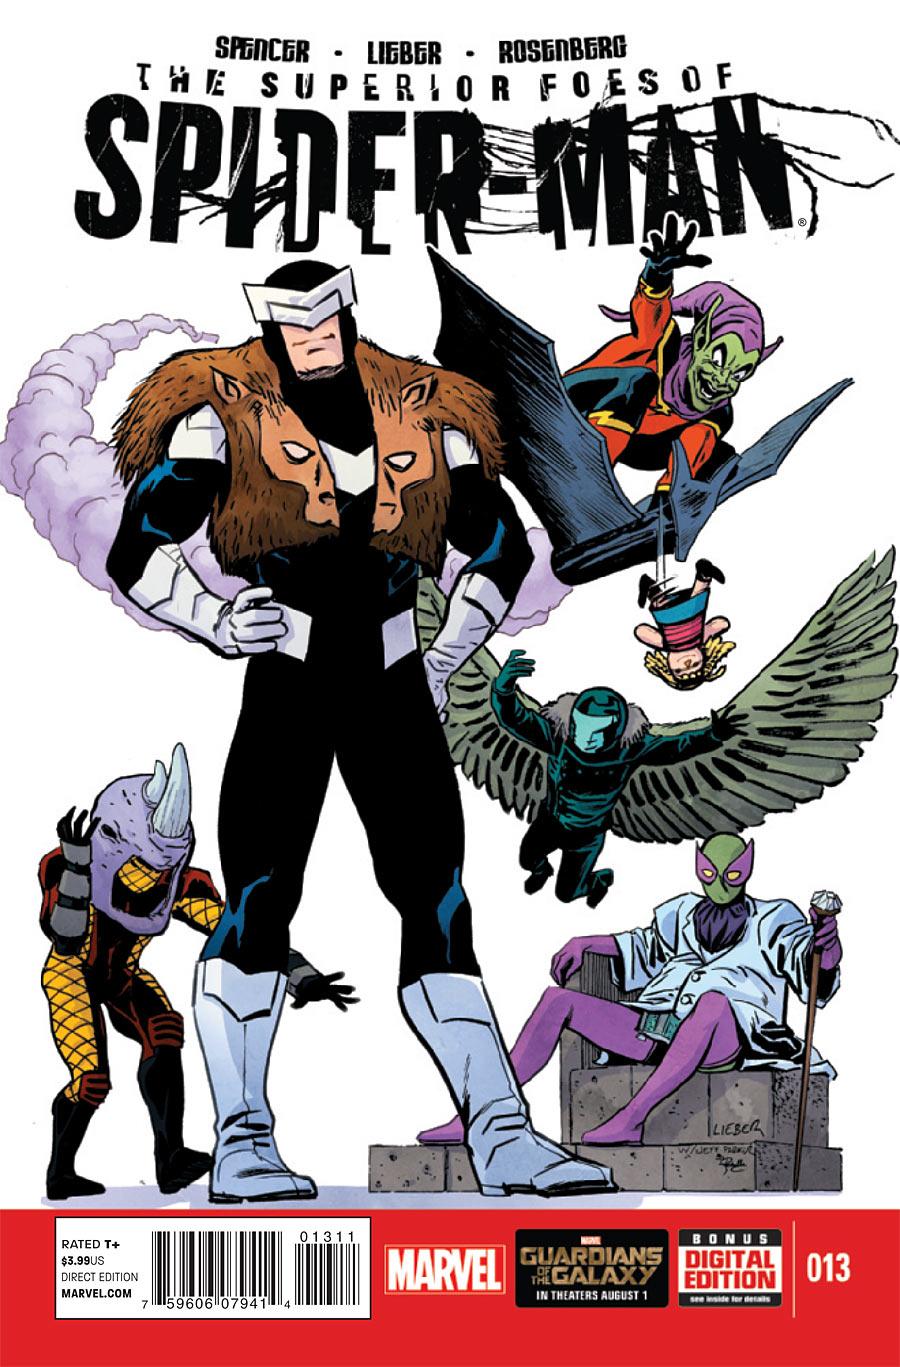 The Superior Foes of Spider-Man Vol. 1 #13